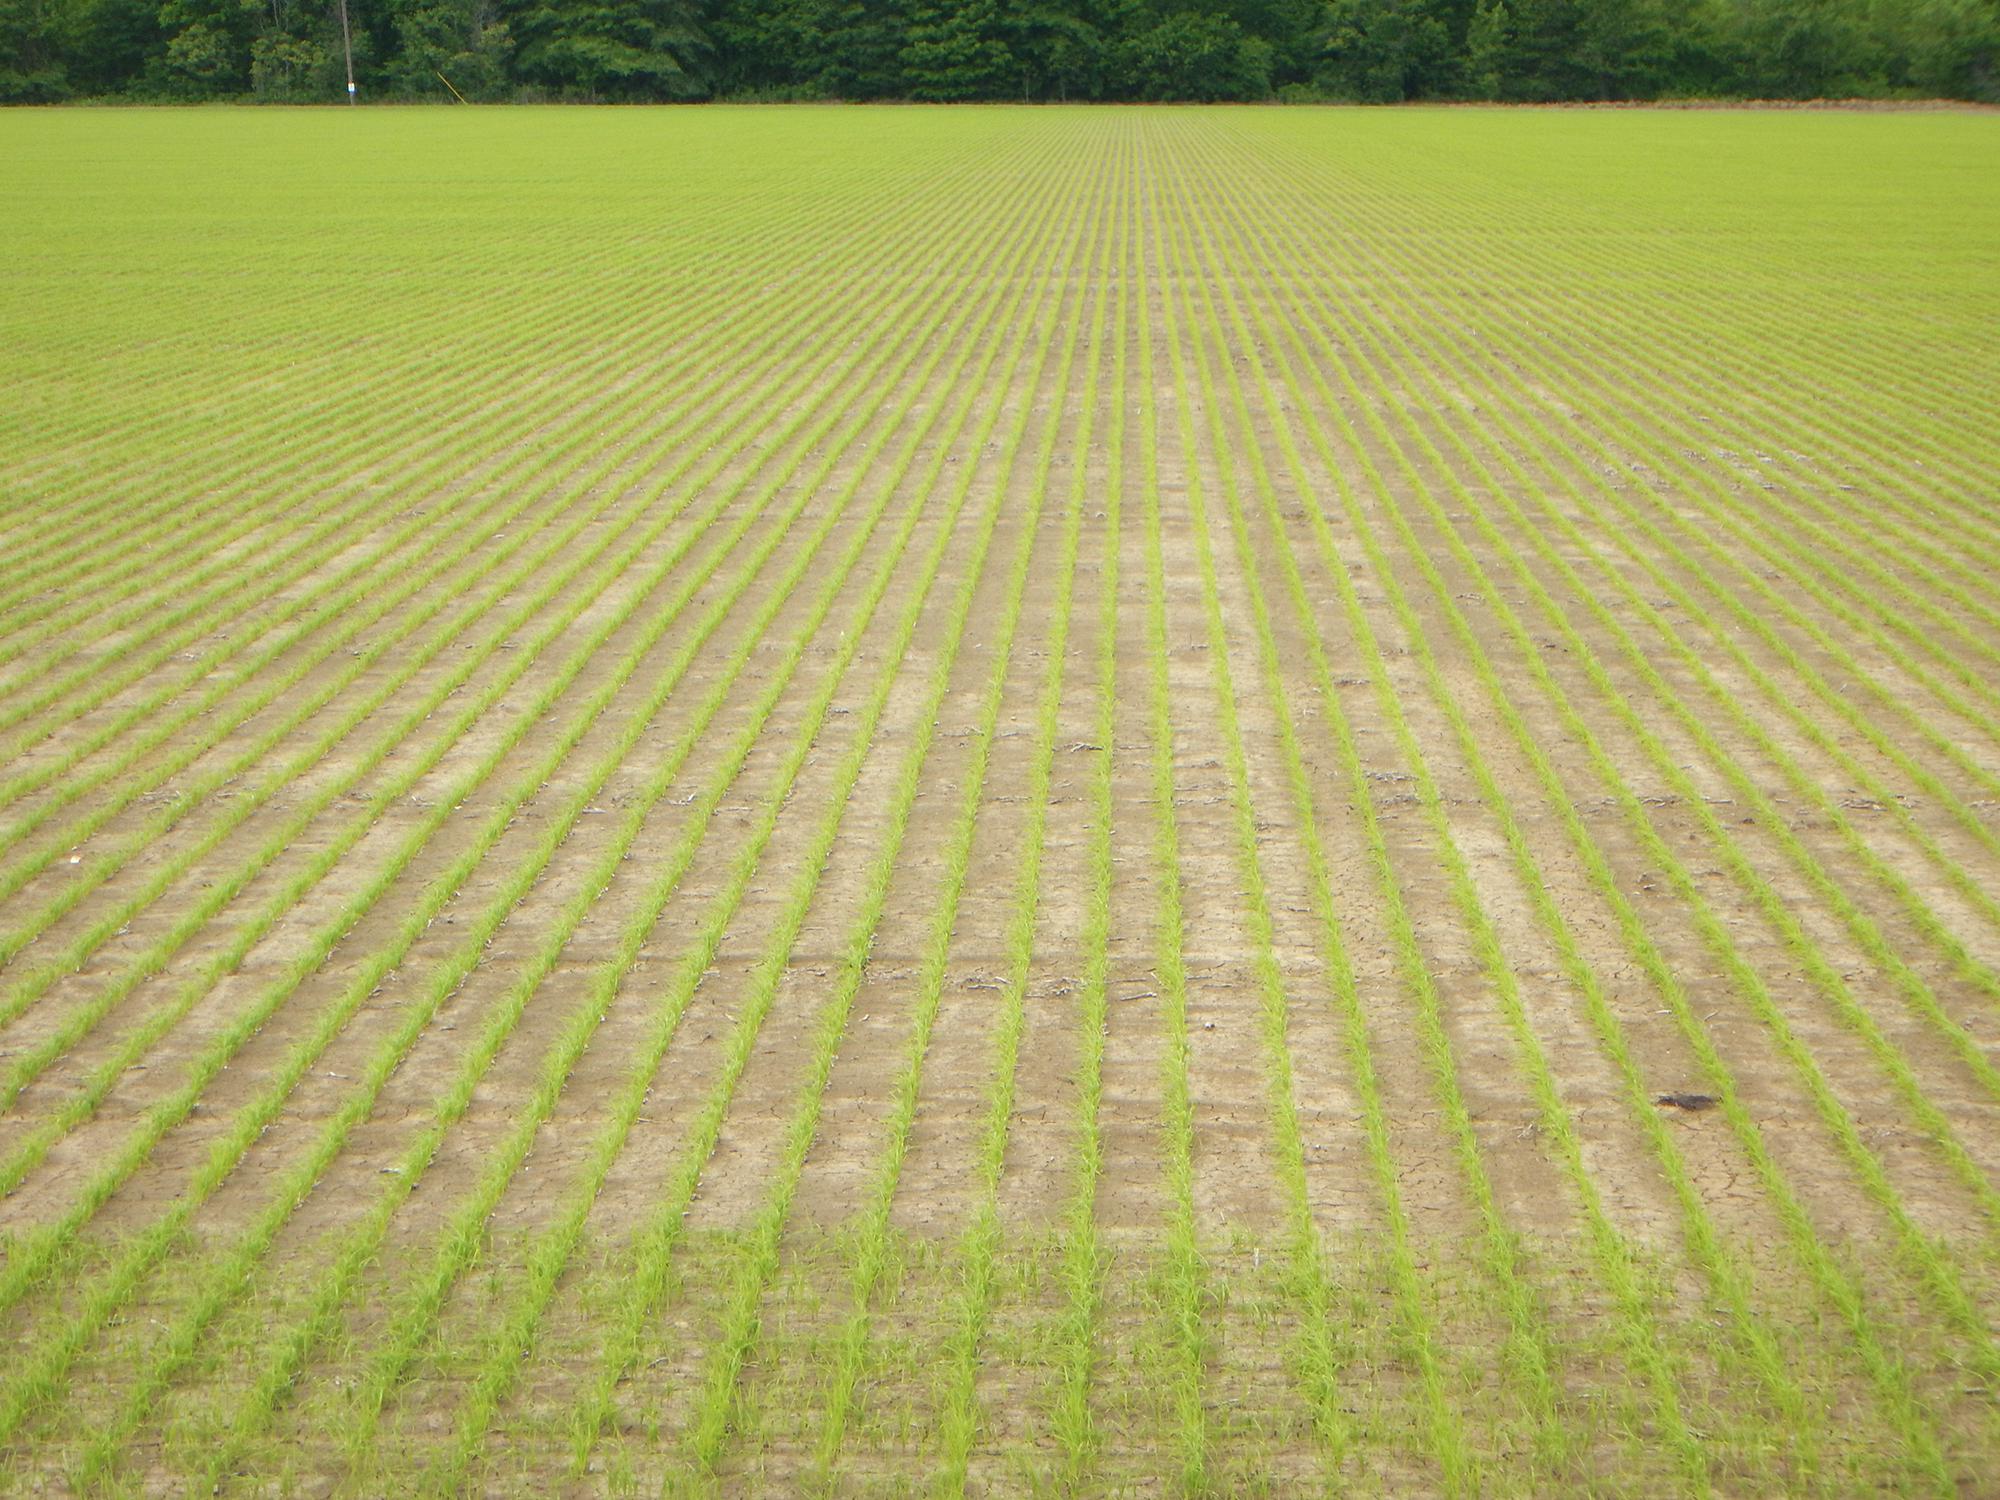 Although half the state's anticipated rice acreage was planted by late April, frequent rains have halted most planting in recent weeks. This rice field in Washington County, Mississippi, was photographed April 28, 2015. (Photo by Mississippi Agricultural and Forestry Experiment Station/Richard Turner)